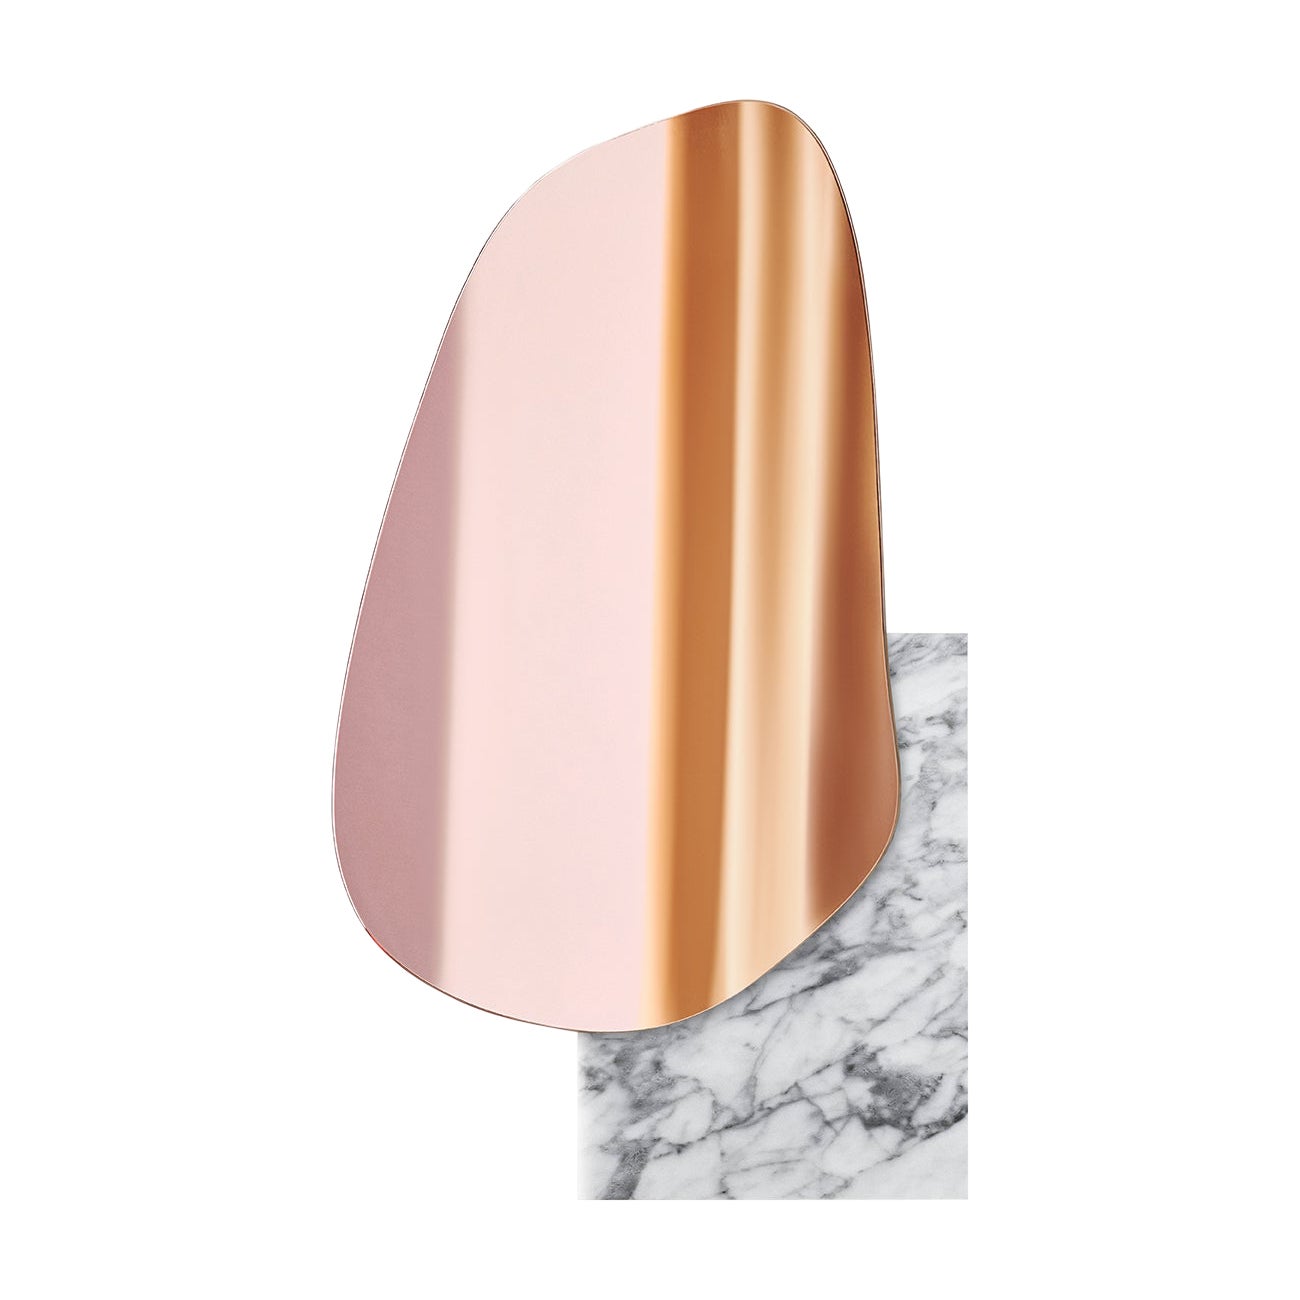 Wall Mirror Lake 3 by Noom with White Marble Statuario Base and Copper Tint